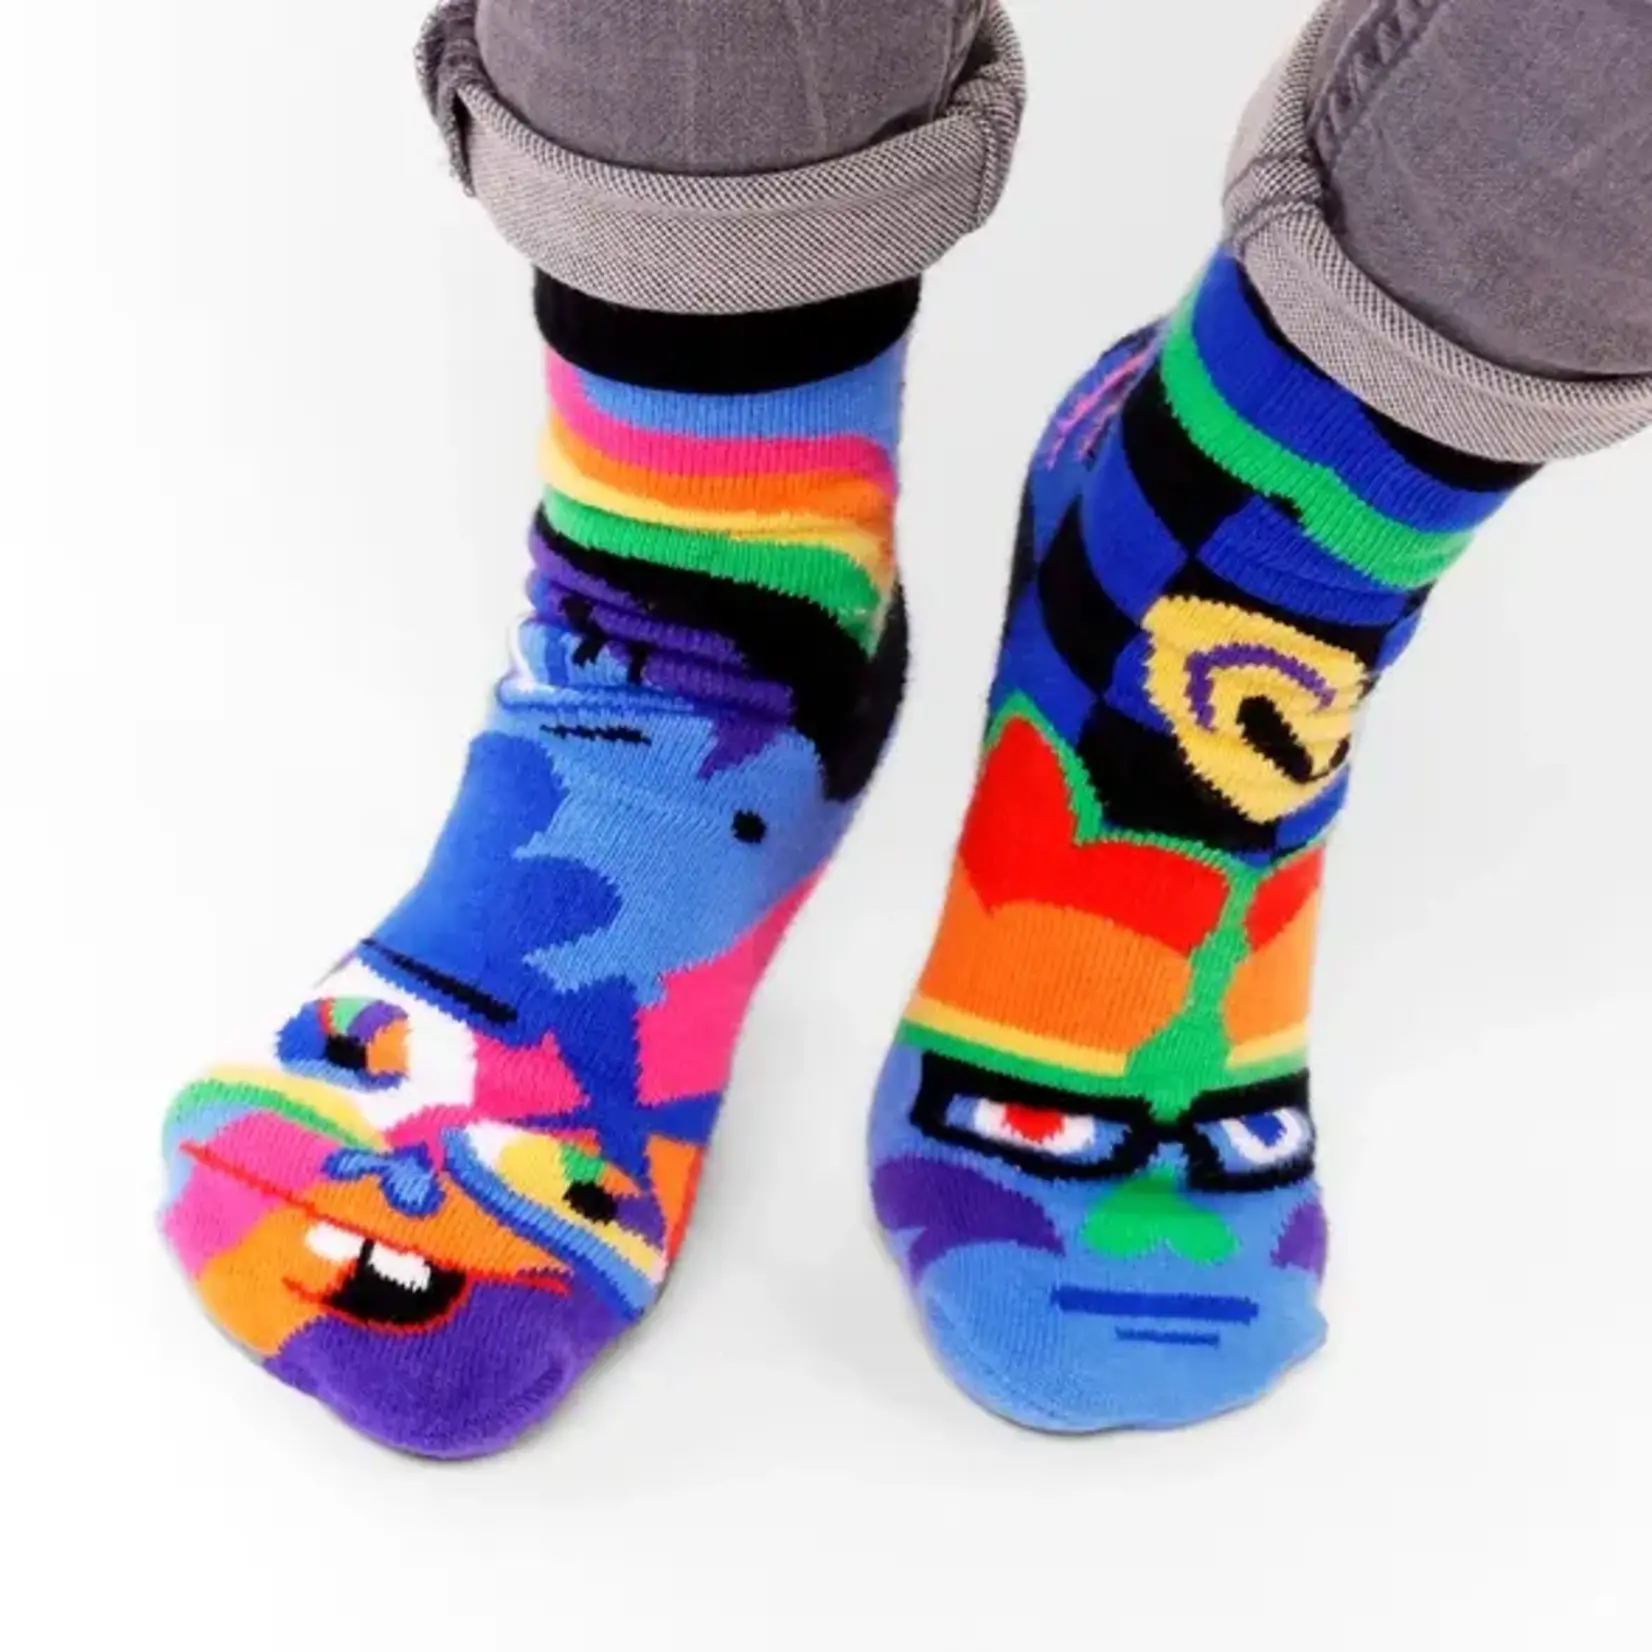 Pals Socks - Silly & Serious, Ages 9-12